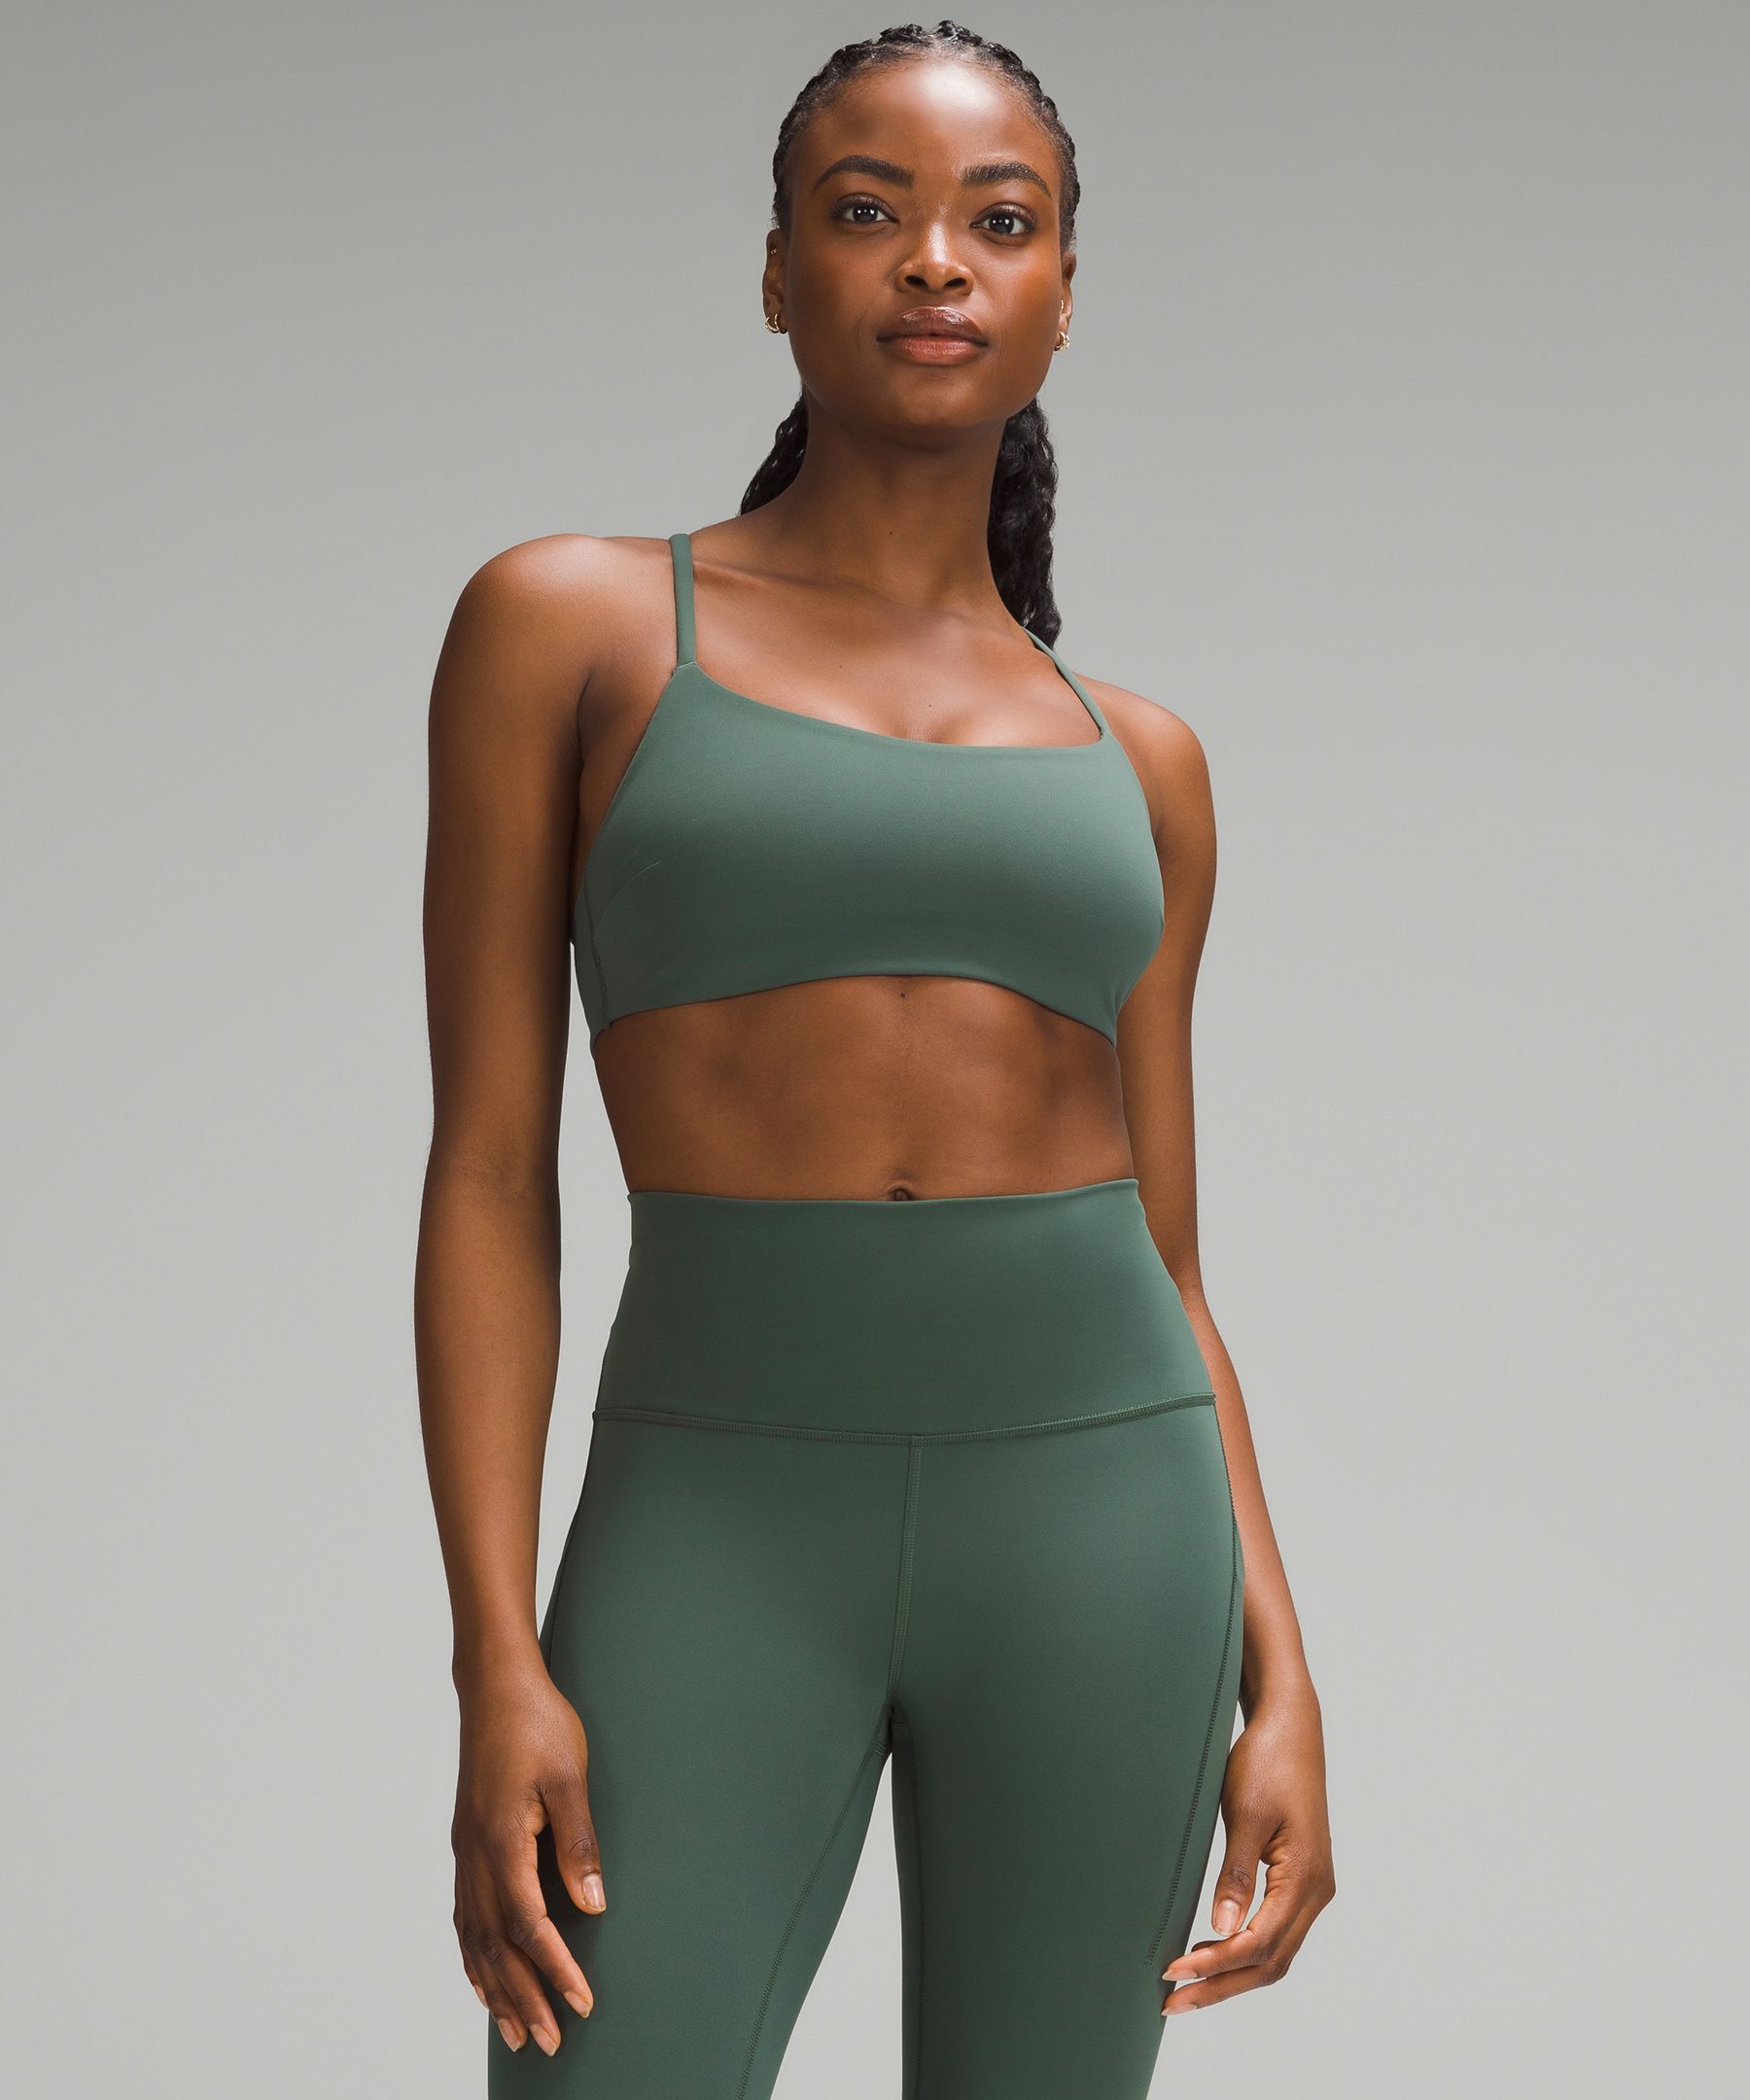 Stay Focused and Stylish with Our Lululemon Sports Bra